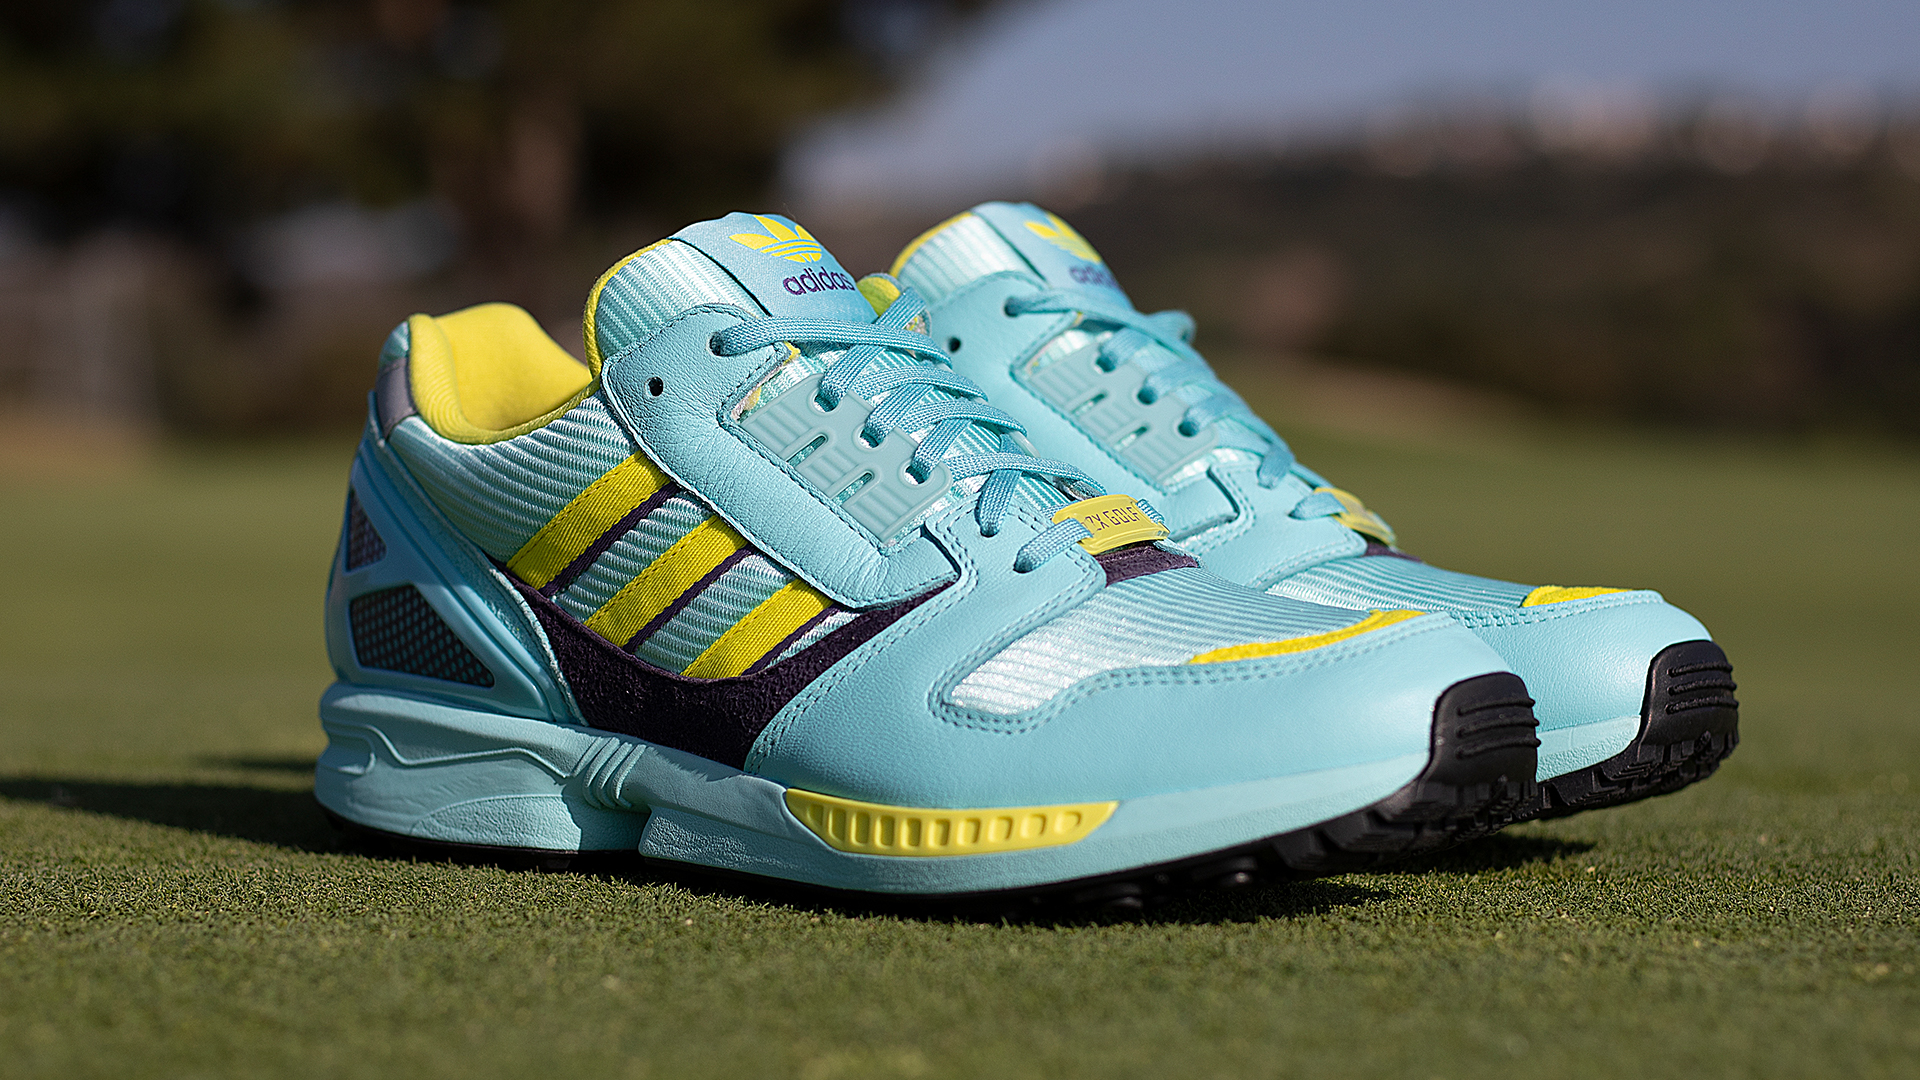 Golf Business News - adidas Golf unveils limited edition ZX 8000 shoes